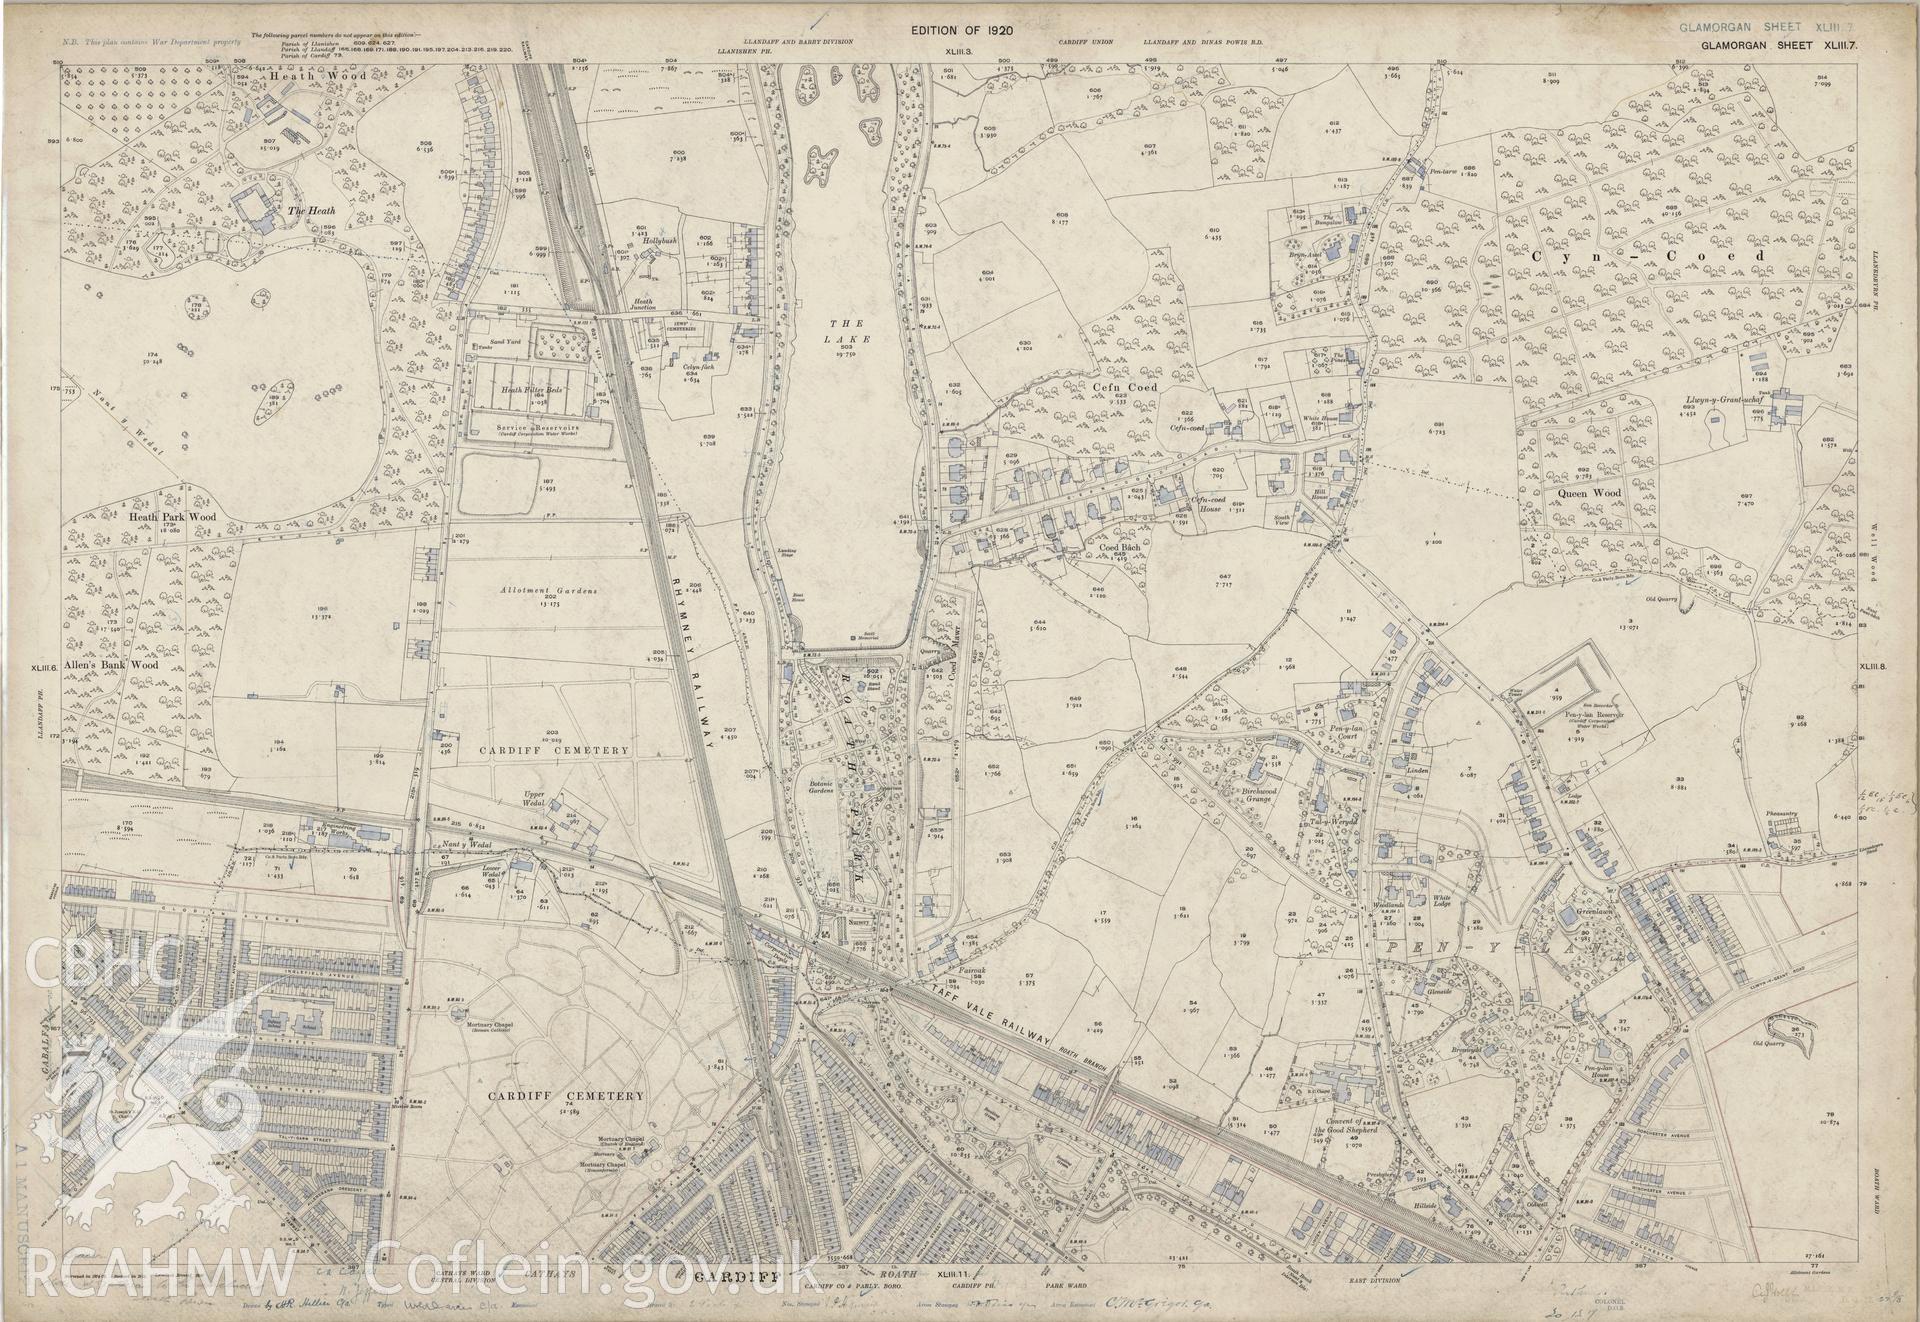 Digitized copy of Ordnance Survey 25 inch first edition map of Cardiff area 1920.